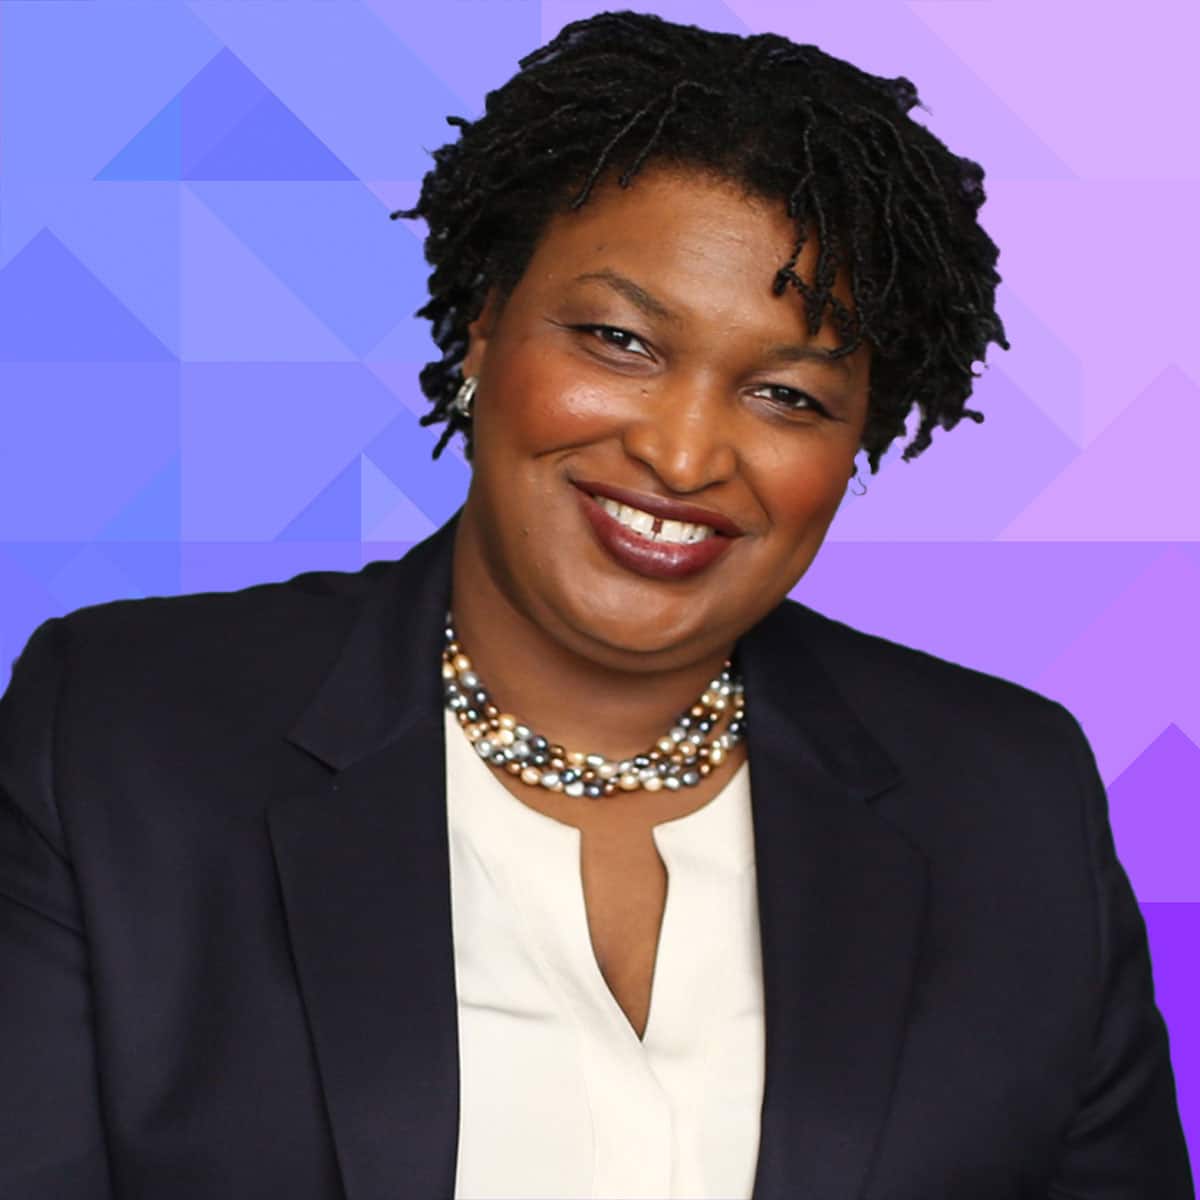 Stacey Abrams Vows To Ensure 'Every Vote Is Counted' In Close Georgia Election